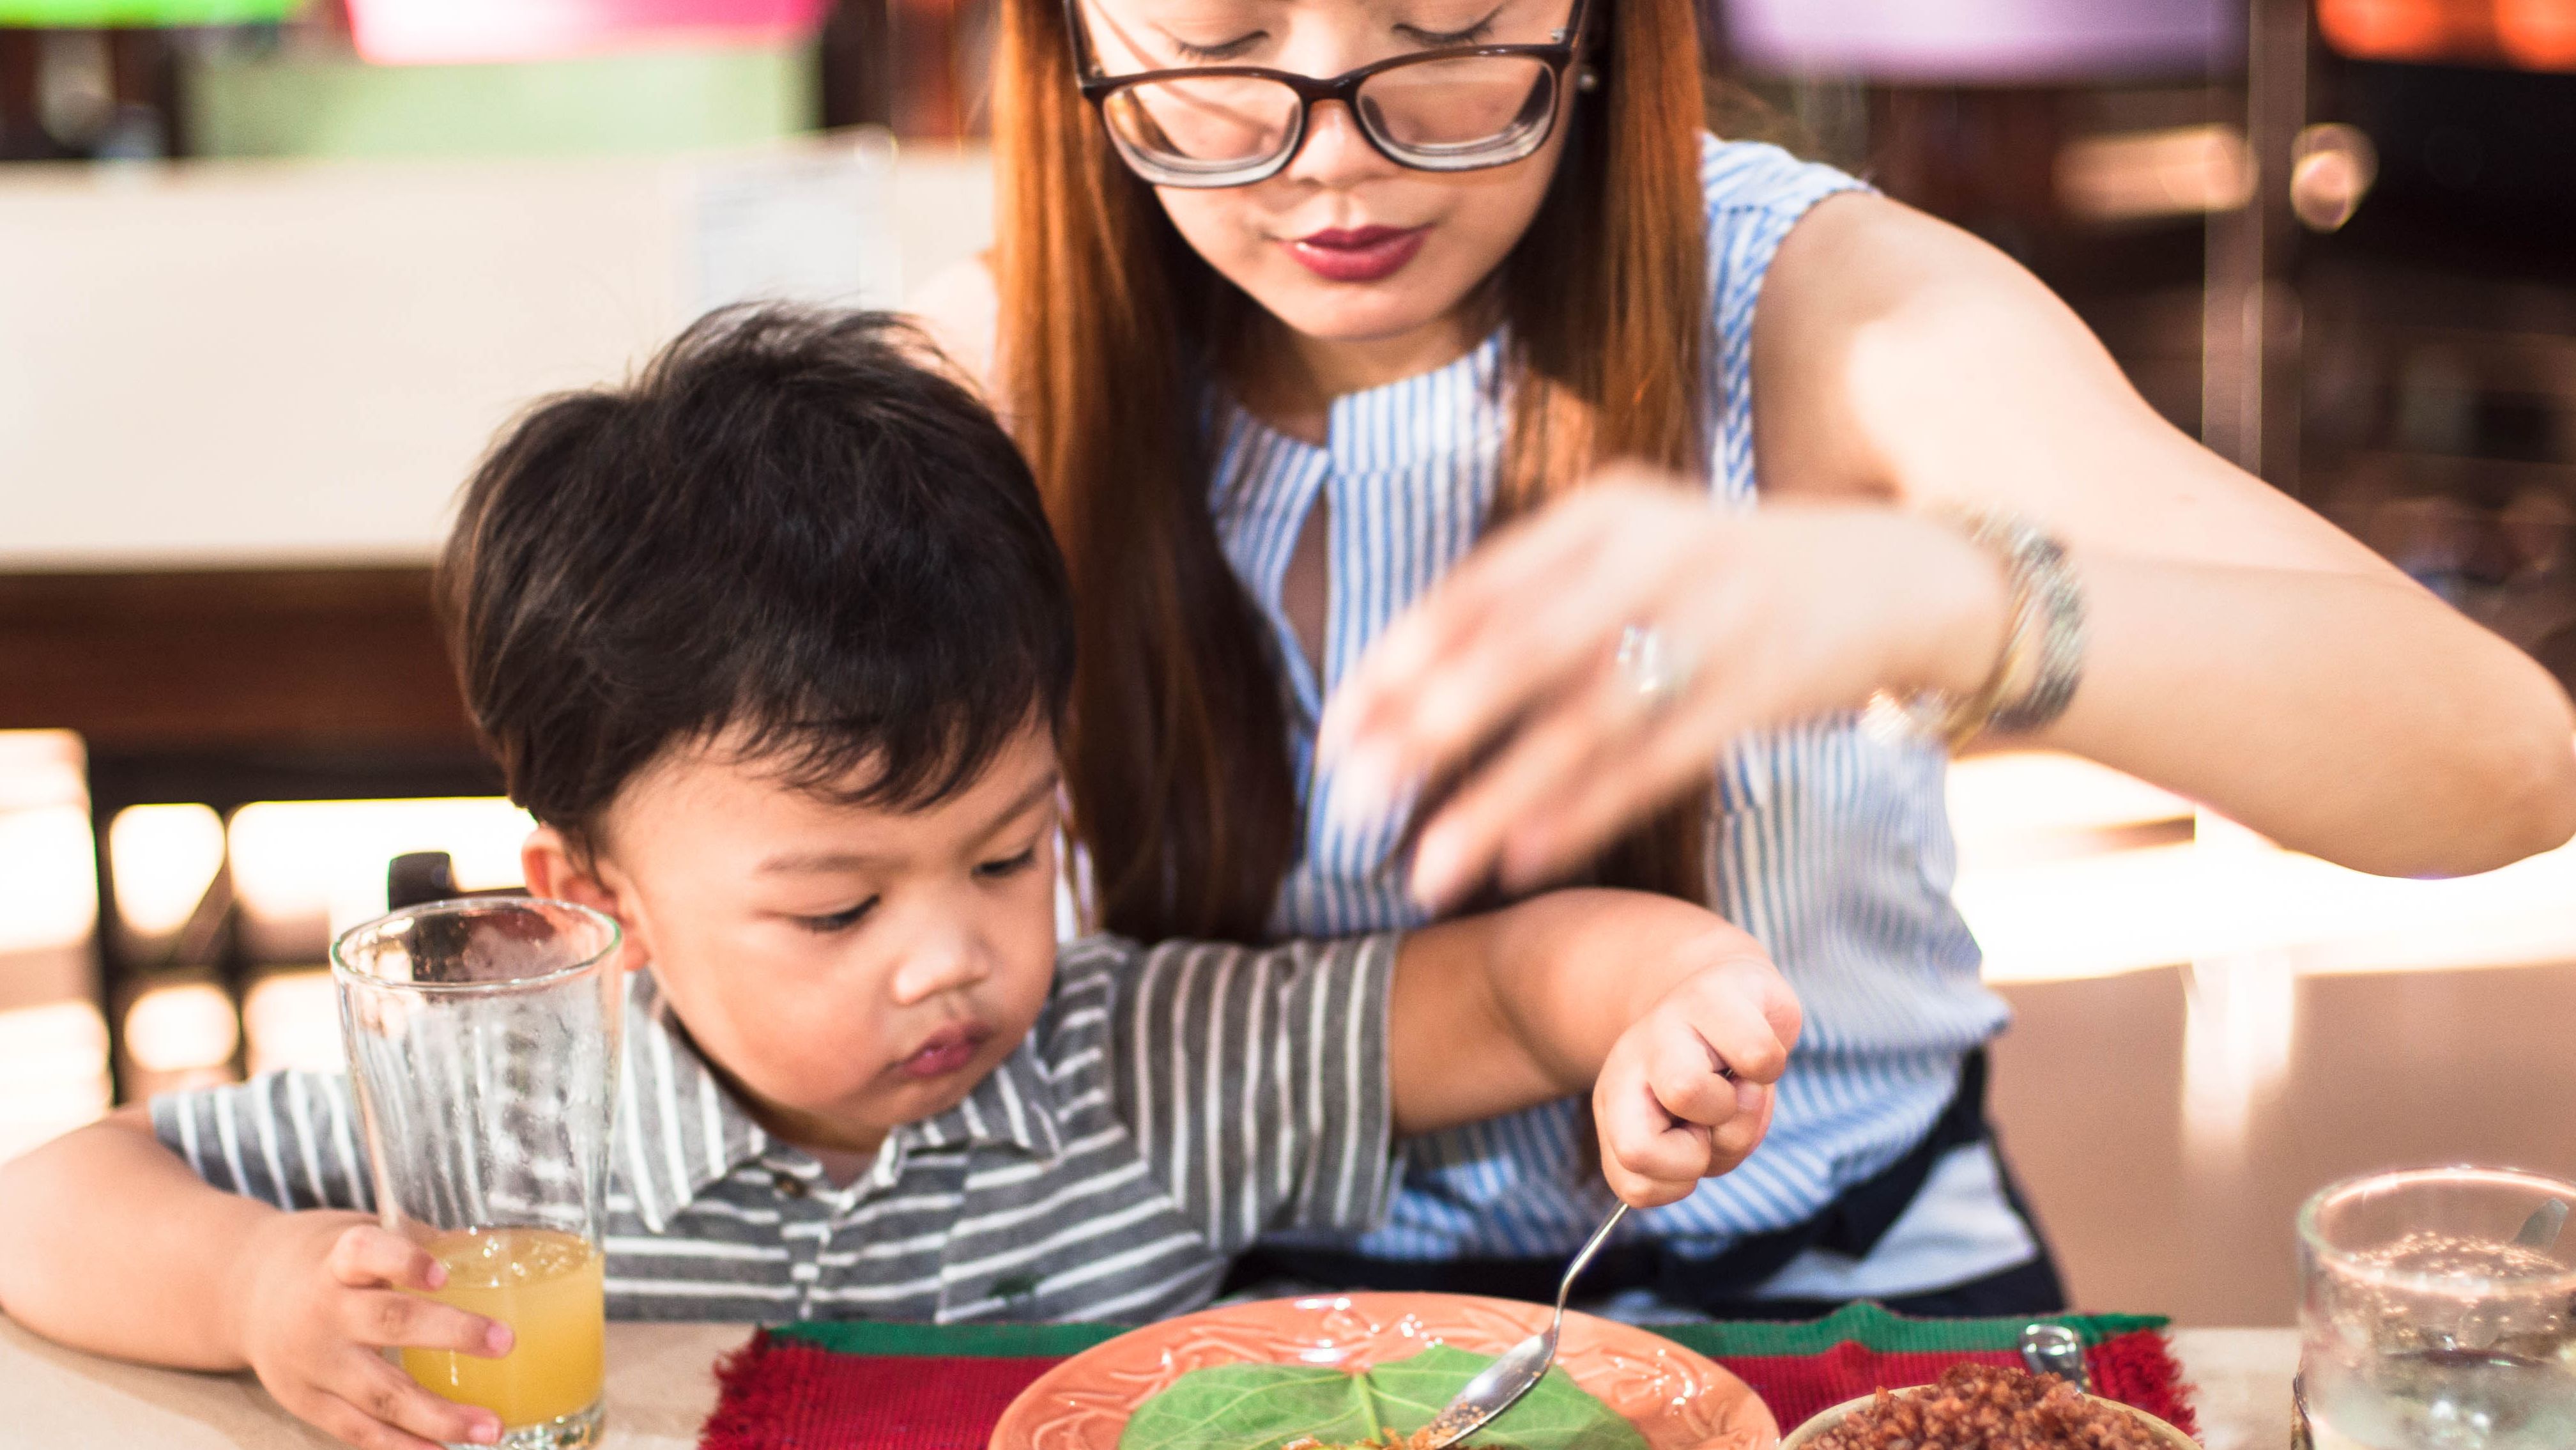 In terms of height and other nutritional measures, vegetarian children and non-vegetarian children are similar, a new study has found.